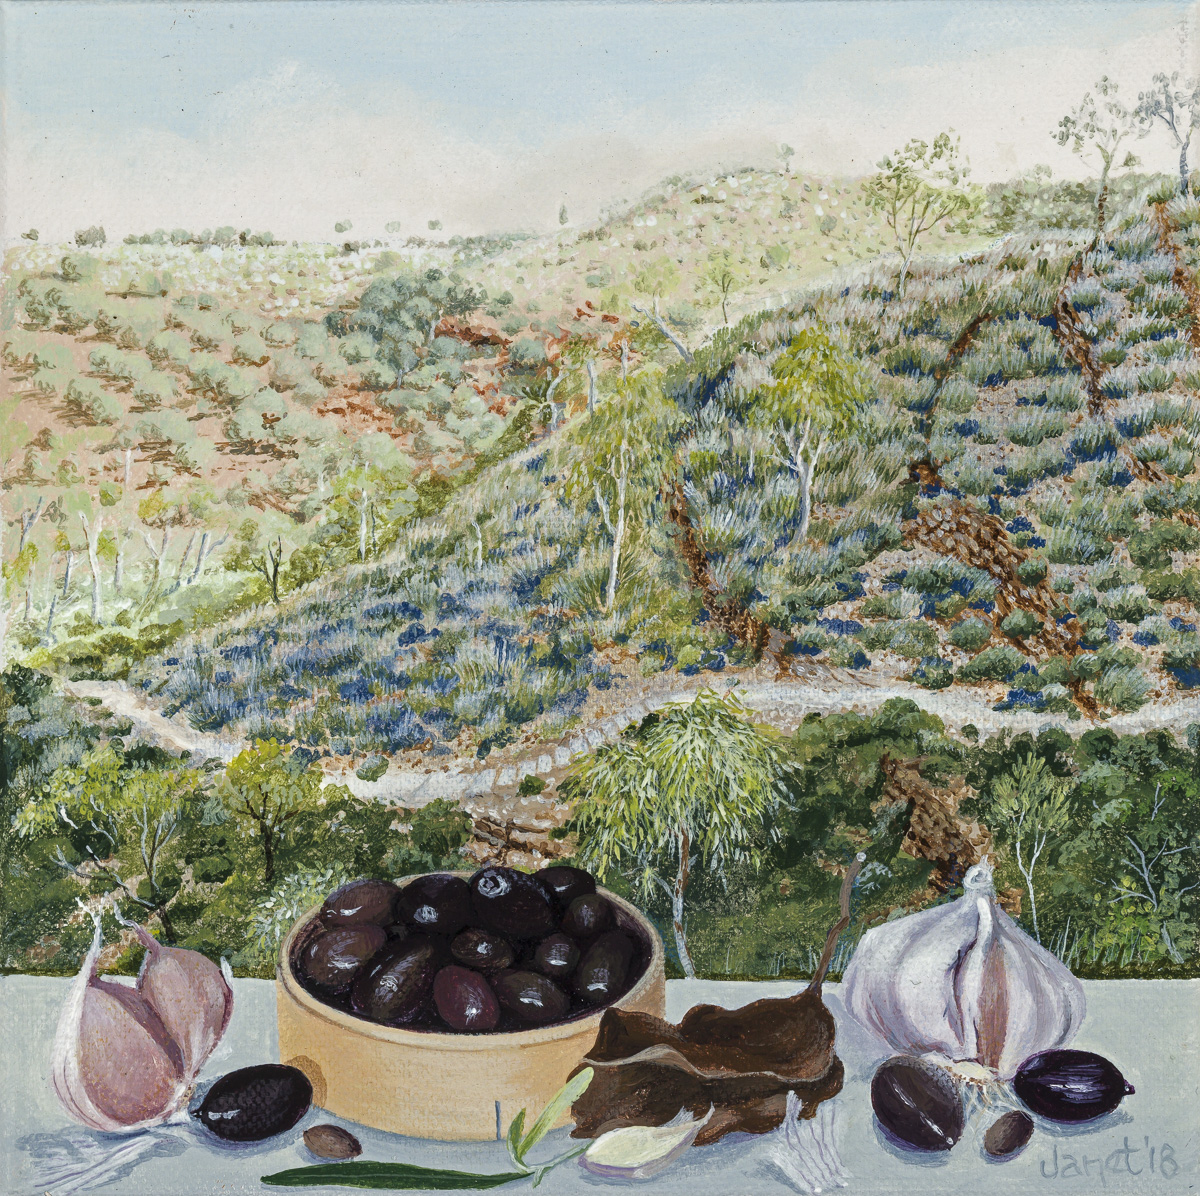 Still Life with Olives and Garlic, Kwartatuma.(Ormiston Gorge.).15 x 15cm. synthetic polymer on canvas. Janet Green 2018